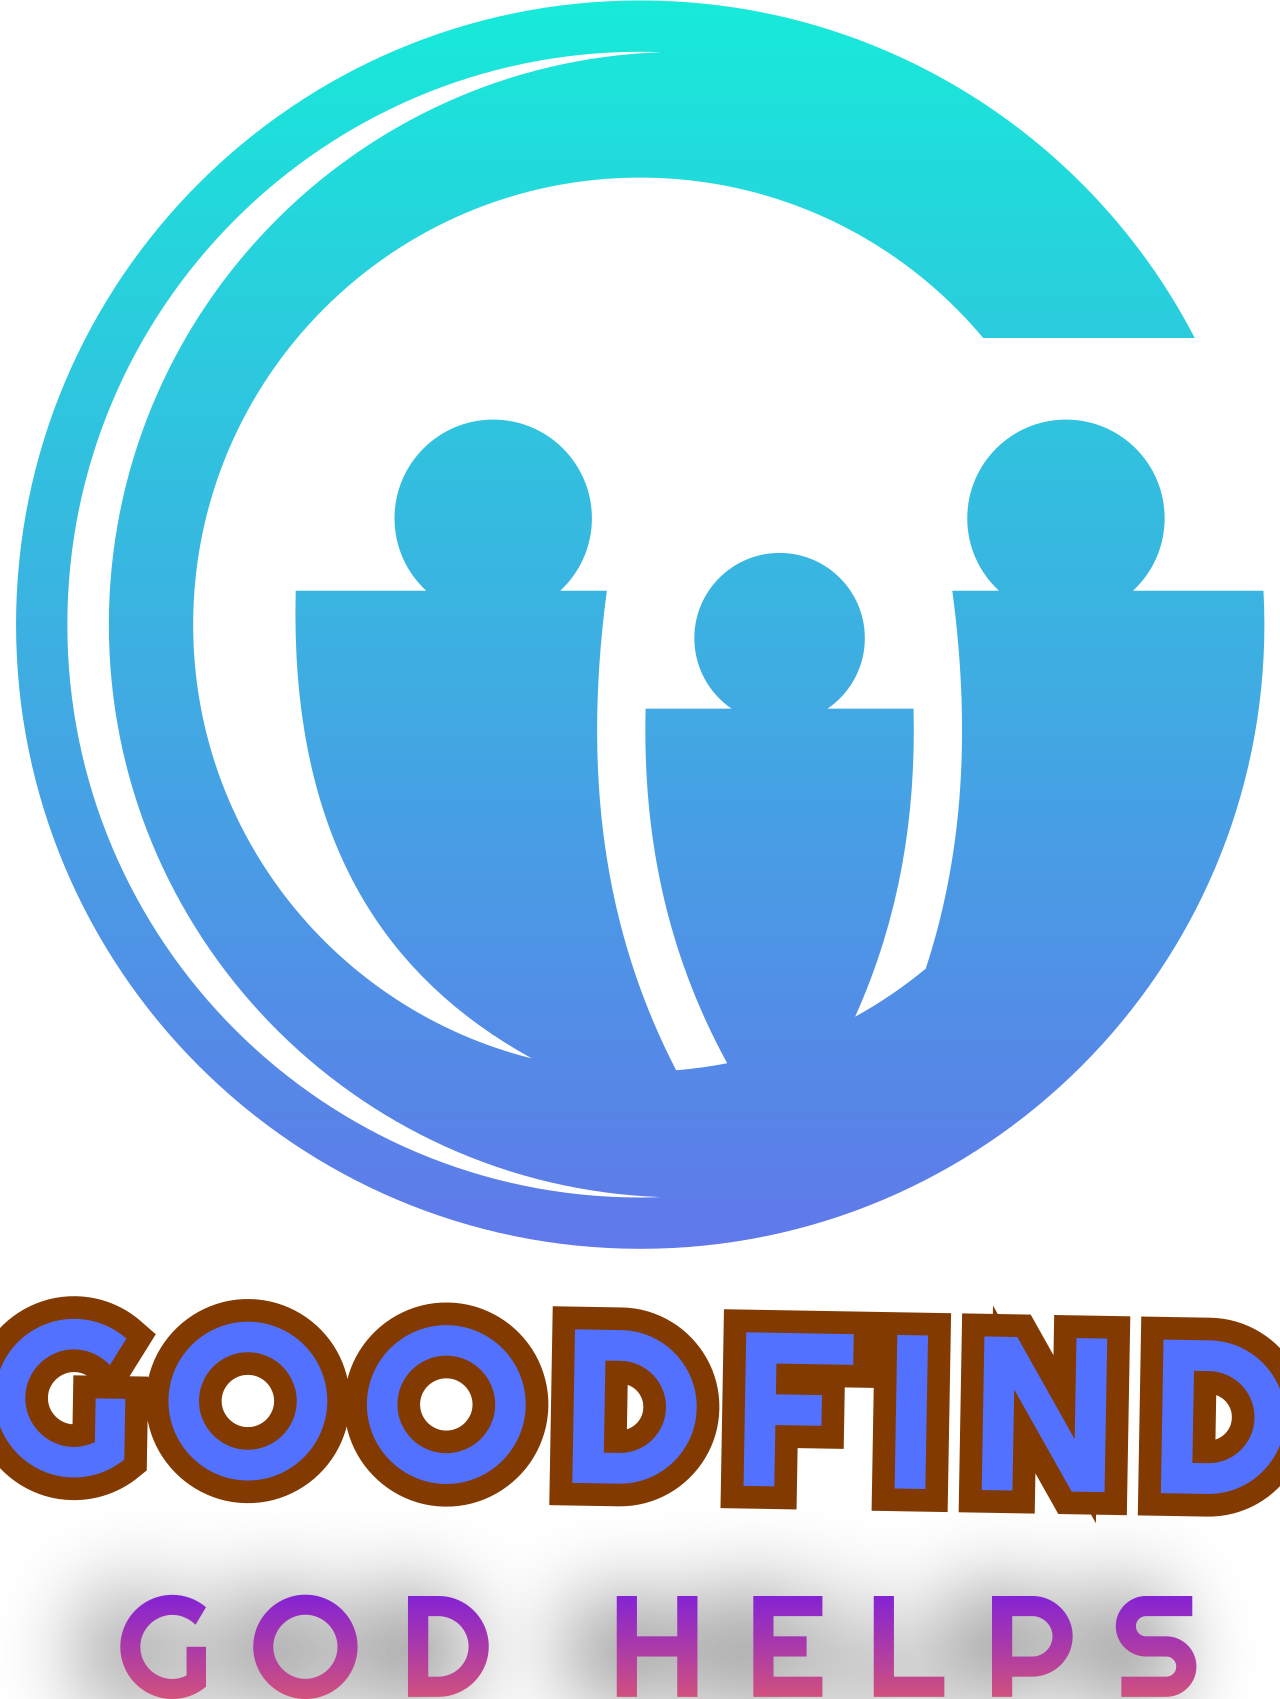 GOODFIND's web page